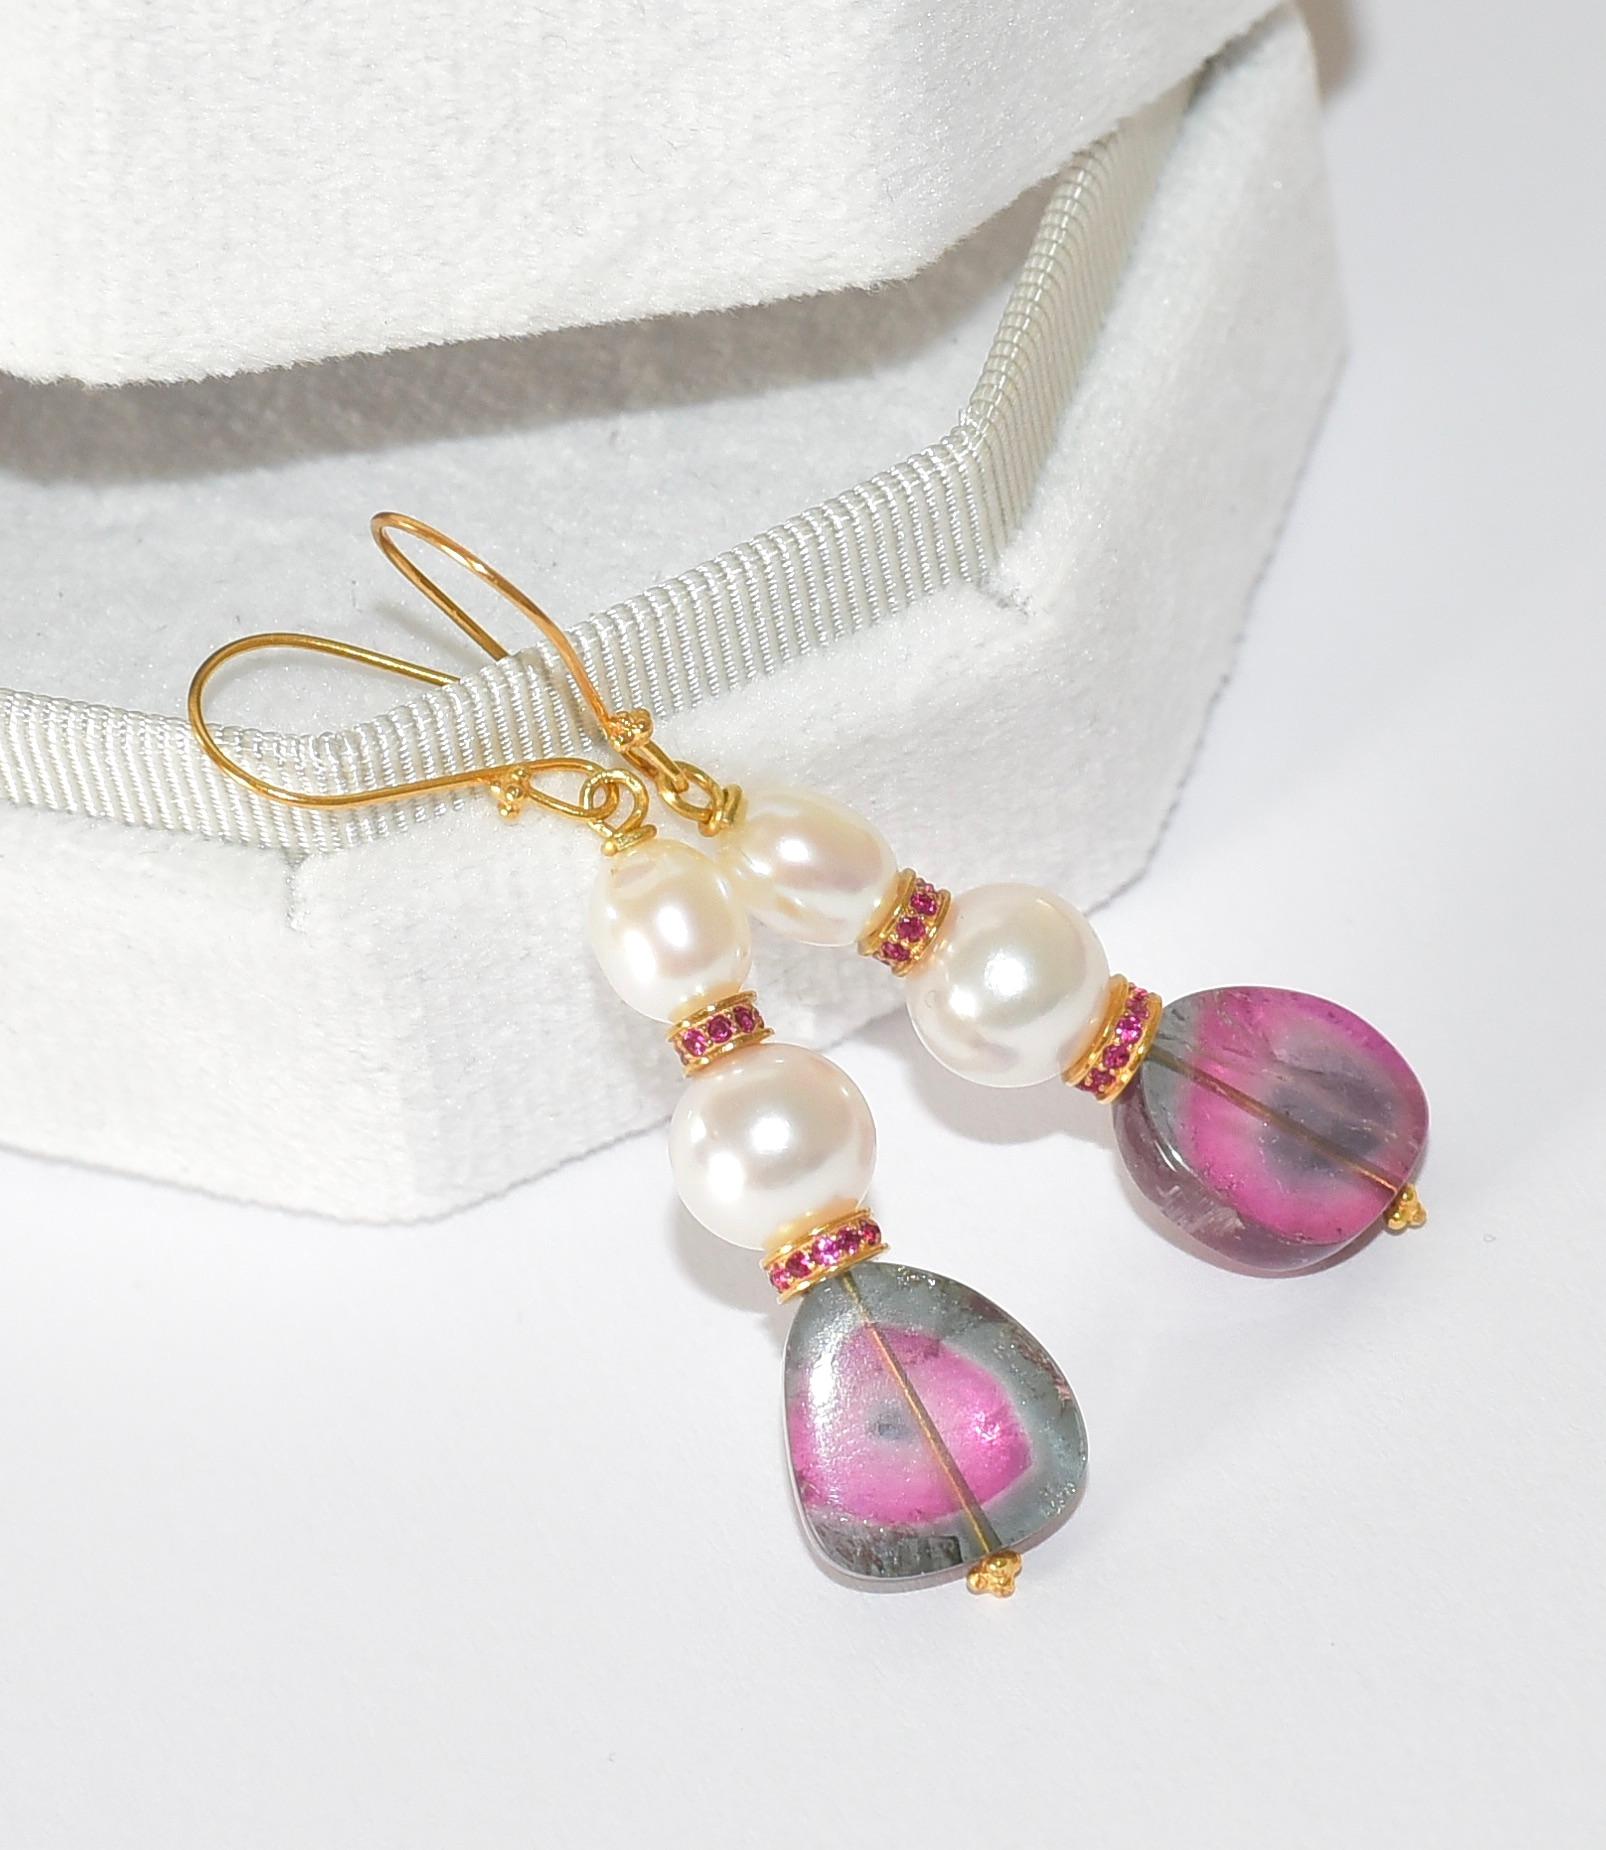 Bead White Akoya Pearl and Watermelon Tourmaline Earrings in 18K Solid Yellow Gold